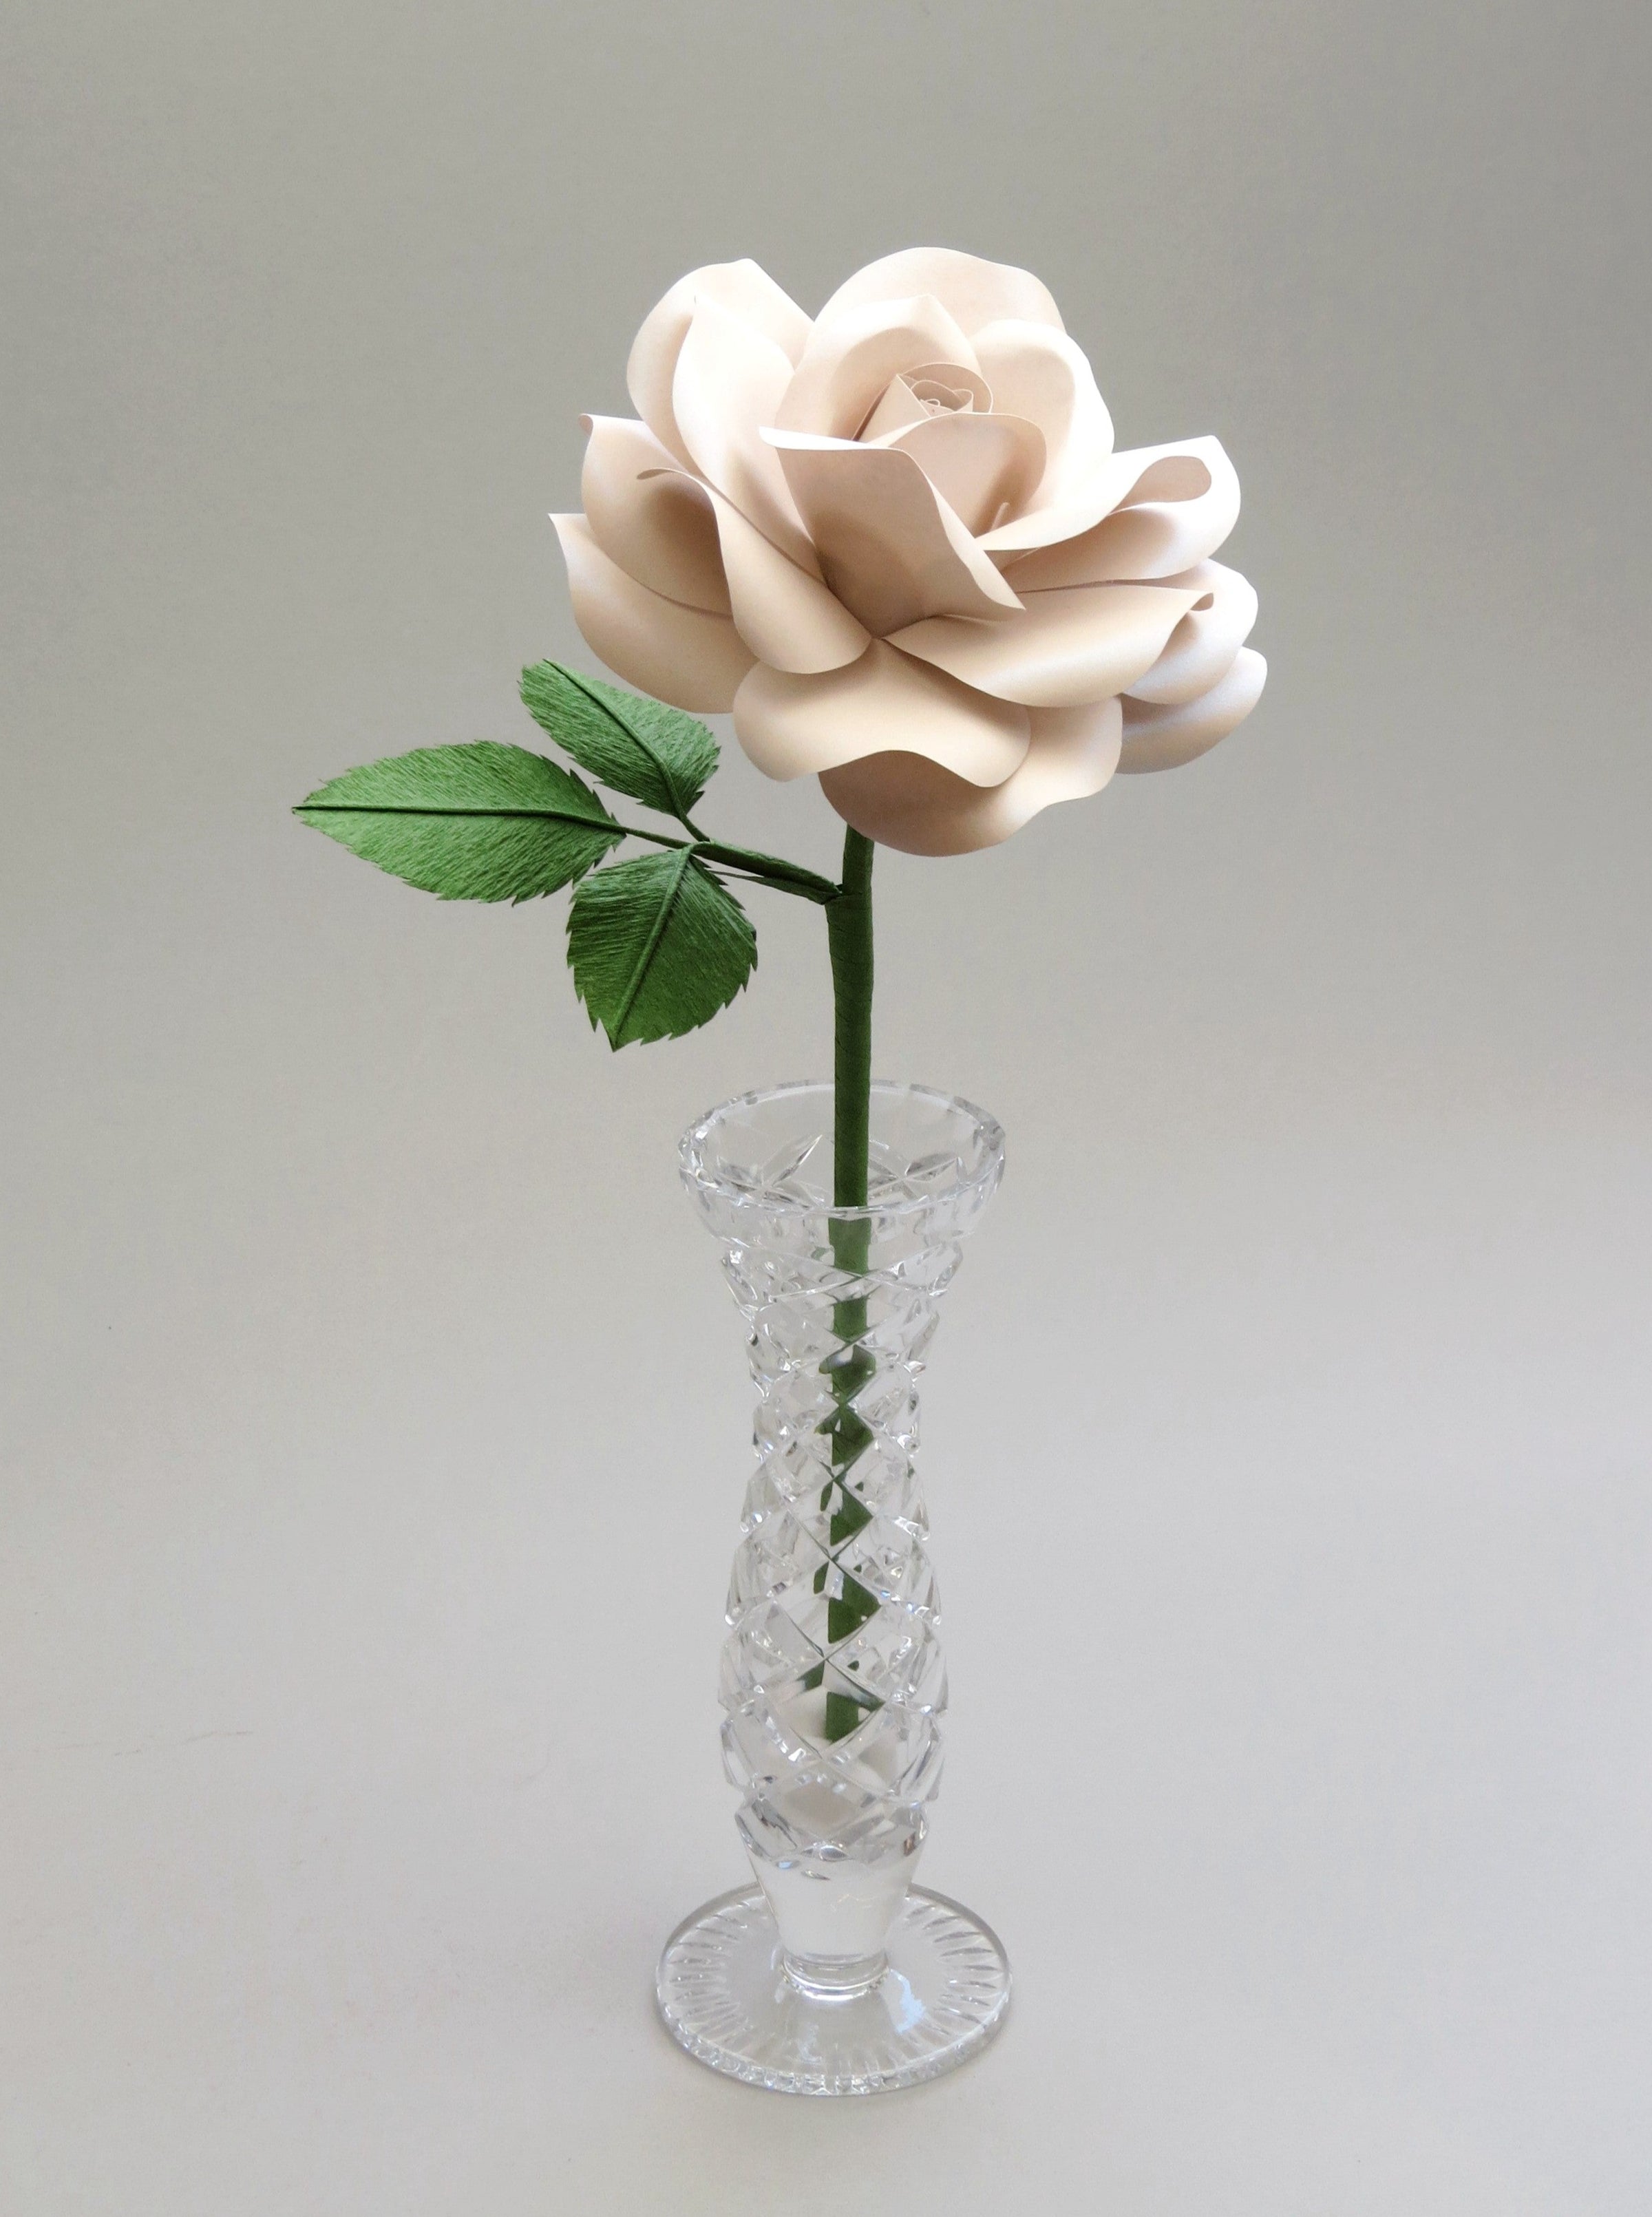 Pearl paper rose with three ivy green crepe paper leaves standing in a narrow glass vase against a light grey backdrop